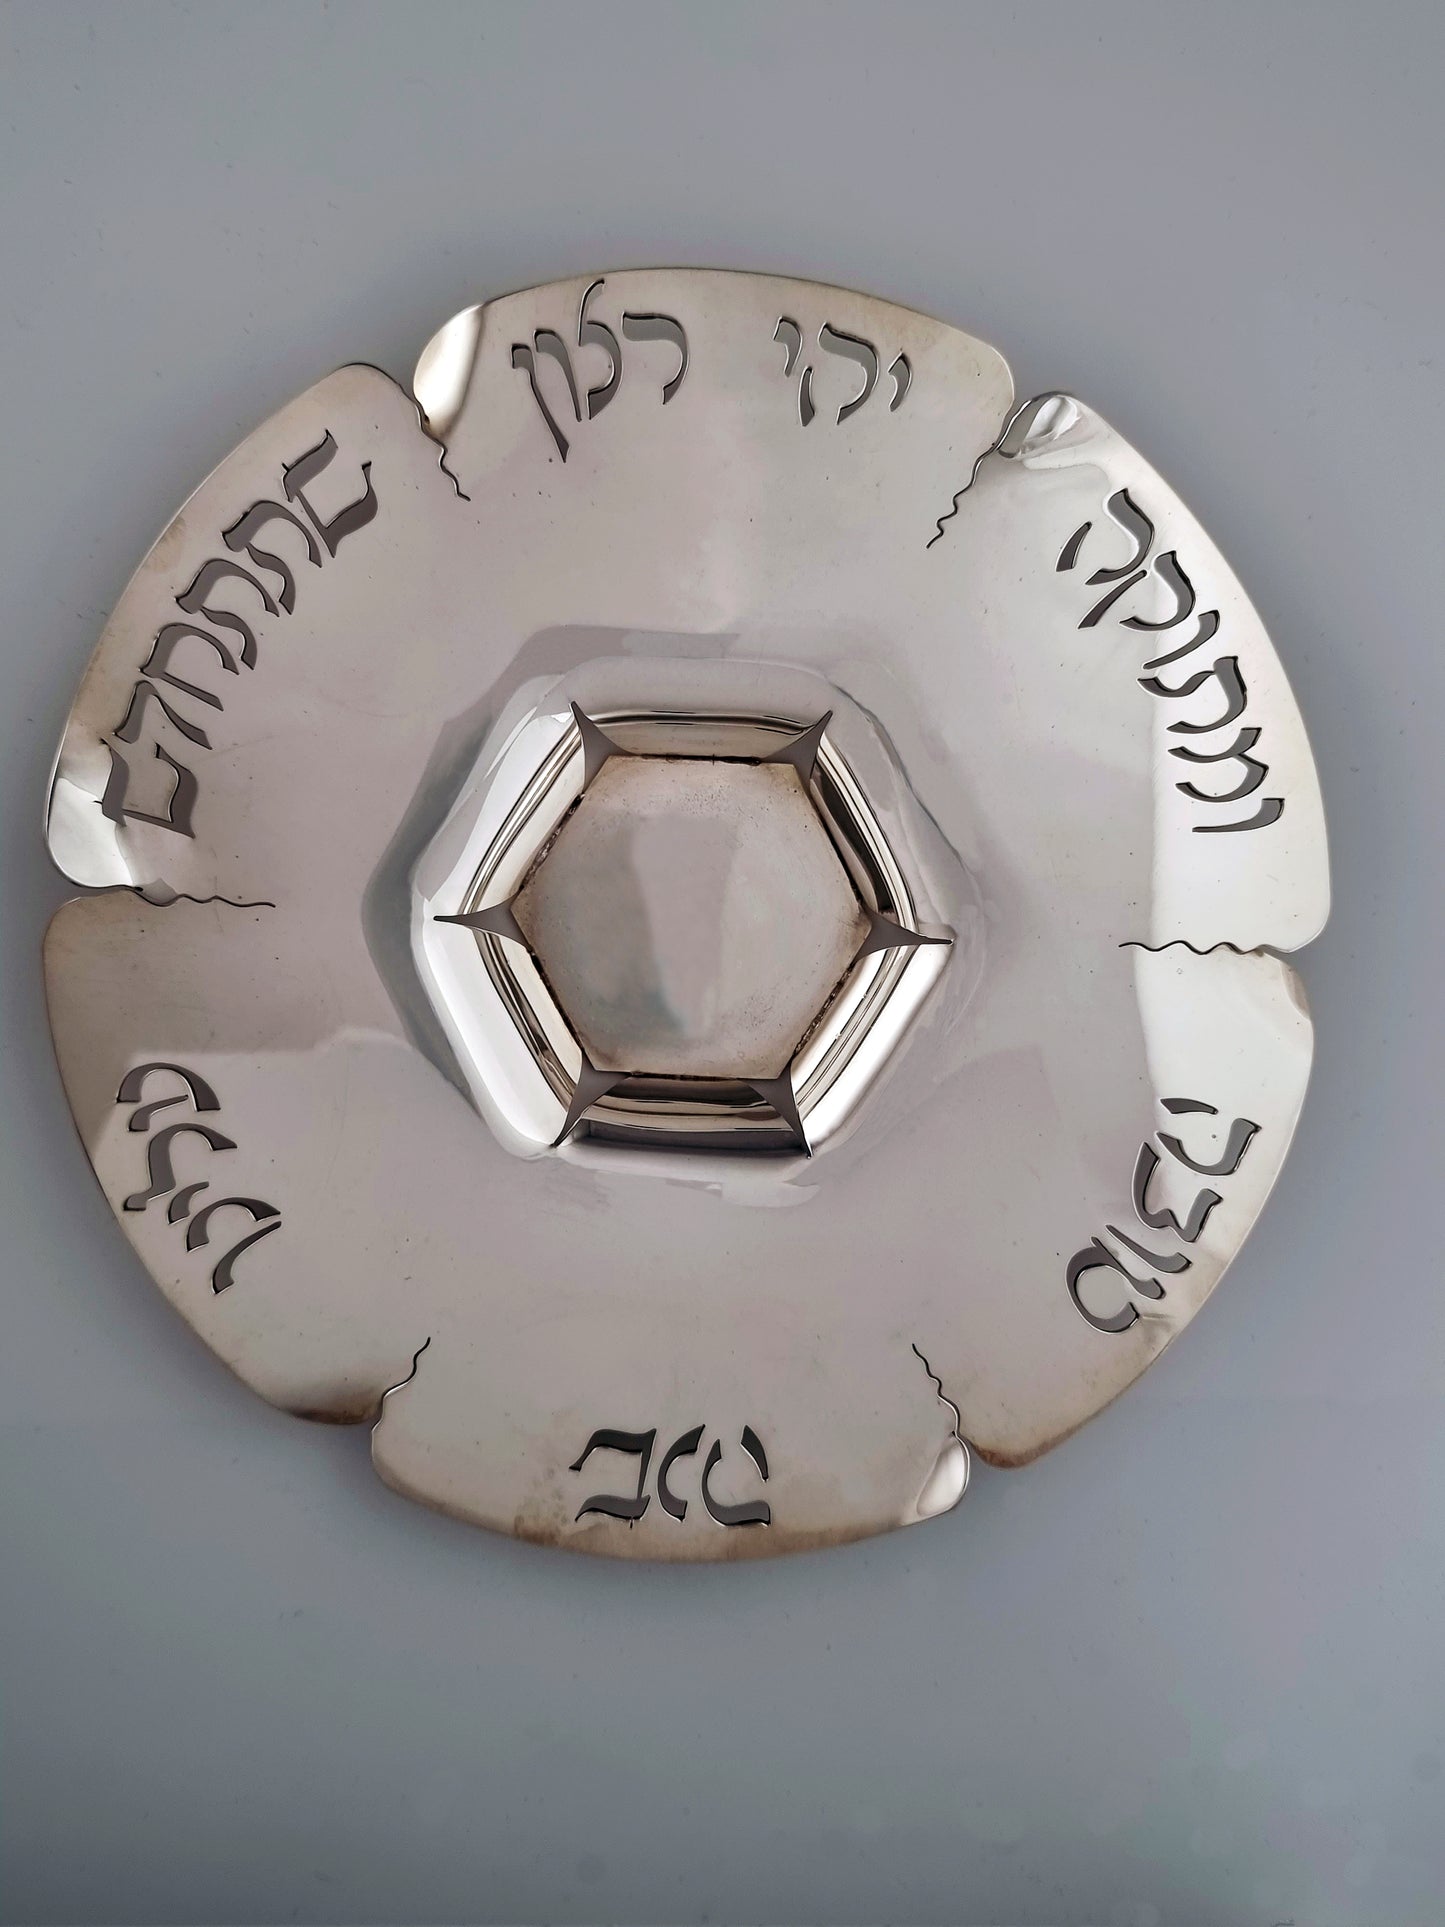 Top view of Abigail Honey Dish. This unique design has six leaves, each leaf partly separated in two dimensions.